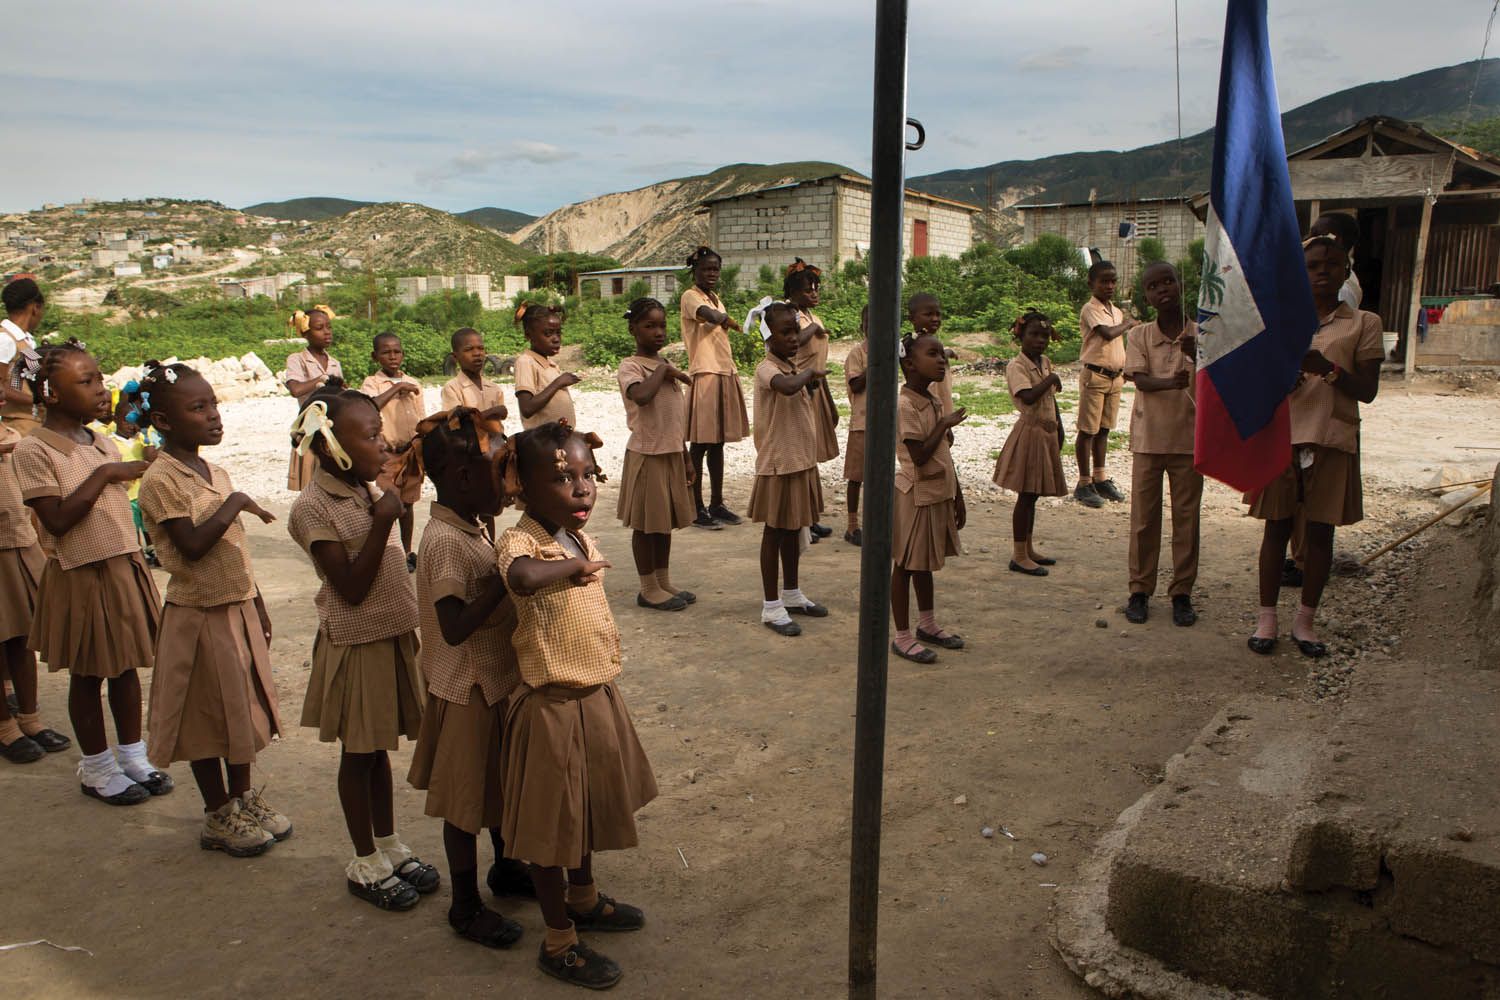 Children sing the national anthem as the Haitian flag is raised at their elementary school, which doubles as the Church of the Nazarene, in the Onaville neighborhood. Pastor Marc Loumette founded the church and school in 2010, after his calling to minster to those affected by the earthquake. Image by Allison Shelley. Haiti, 2017.